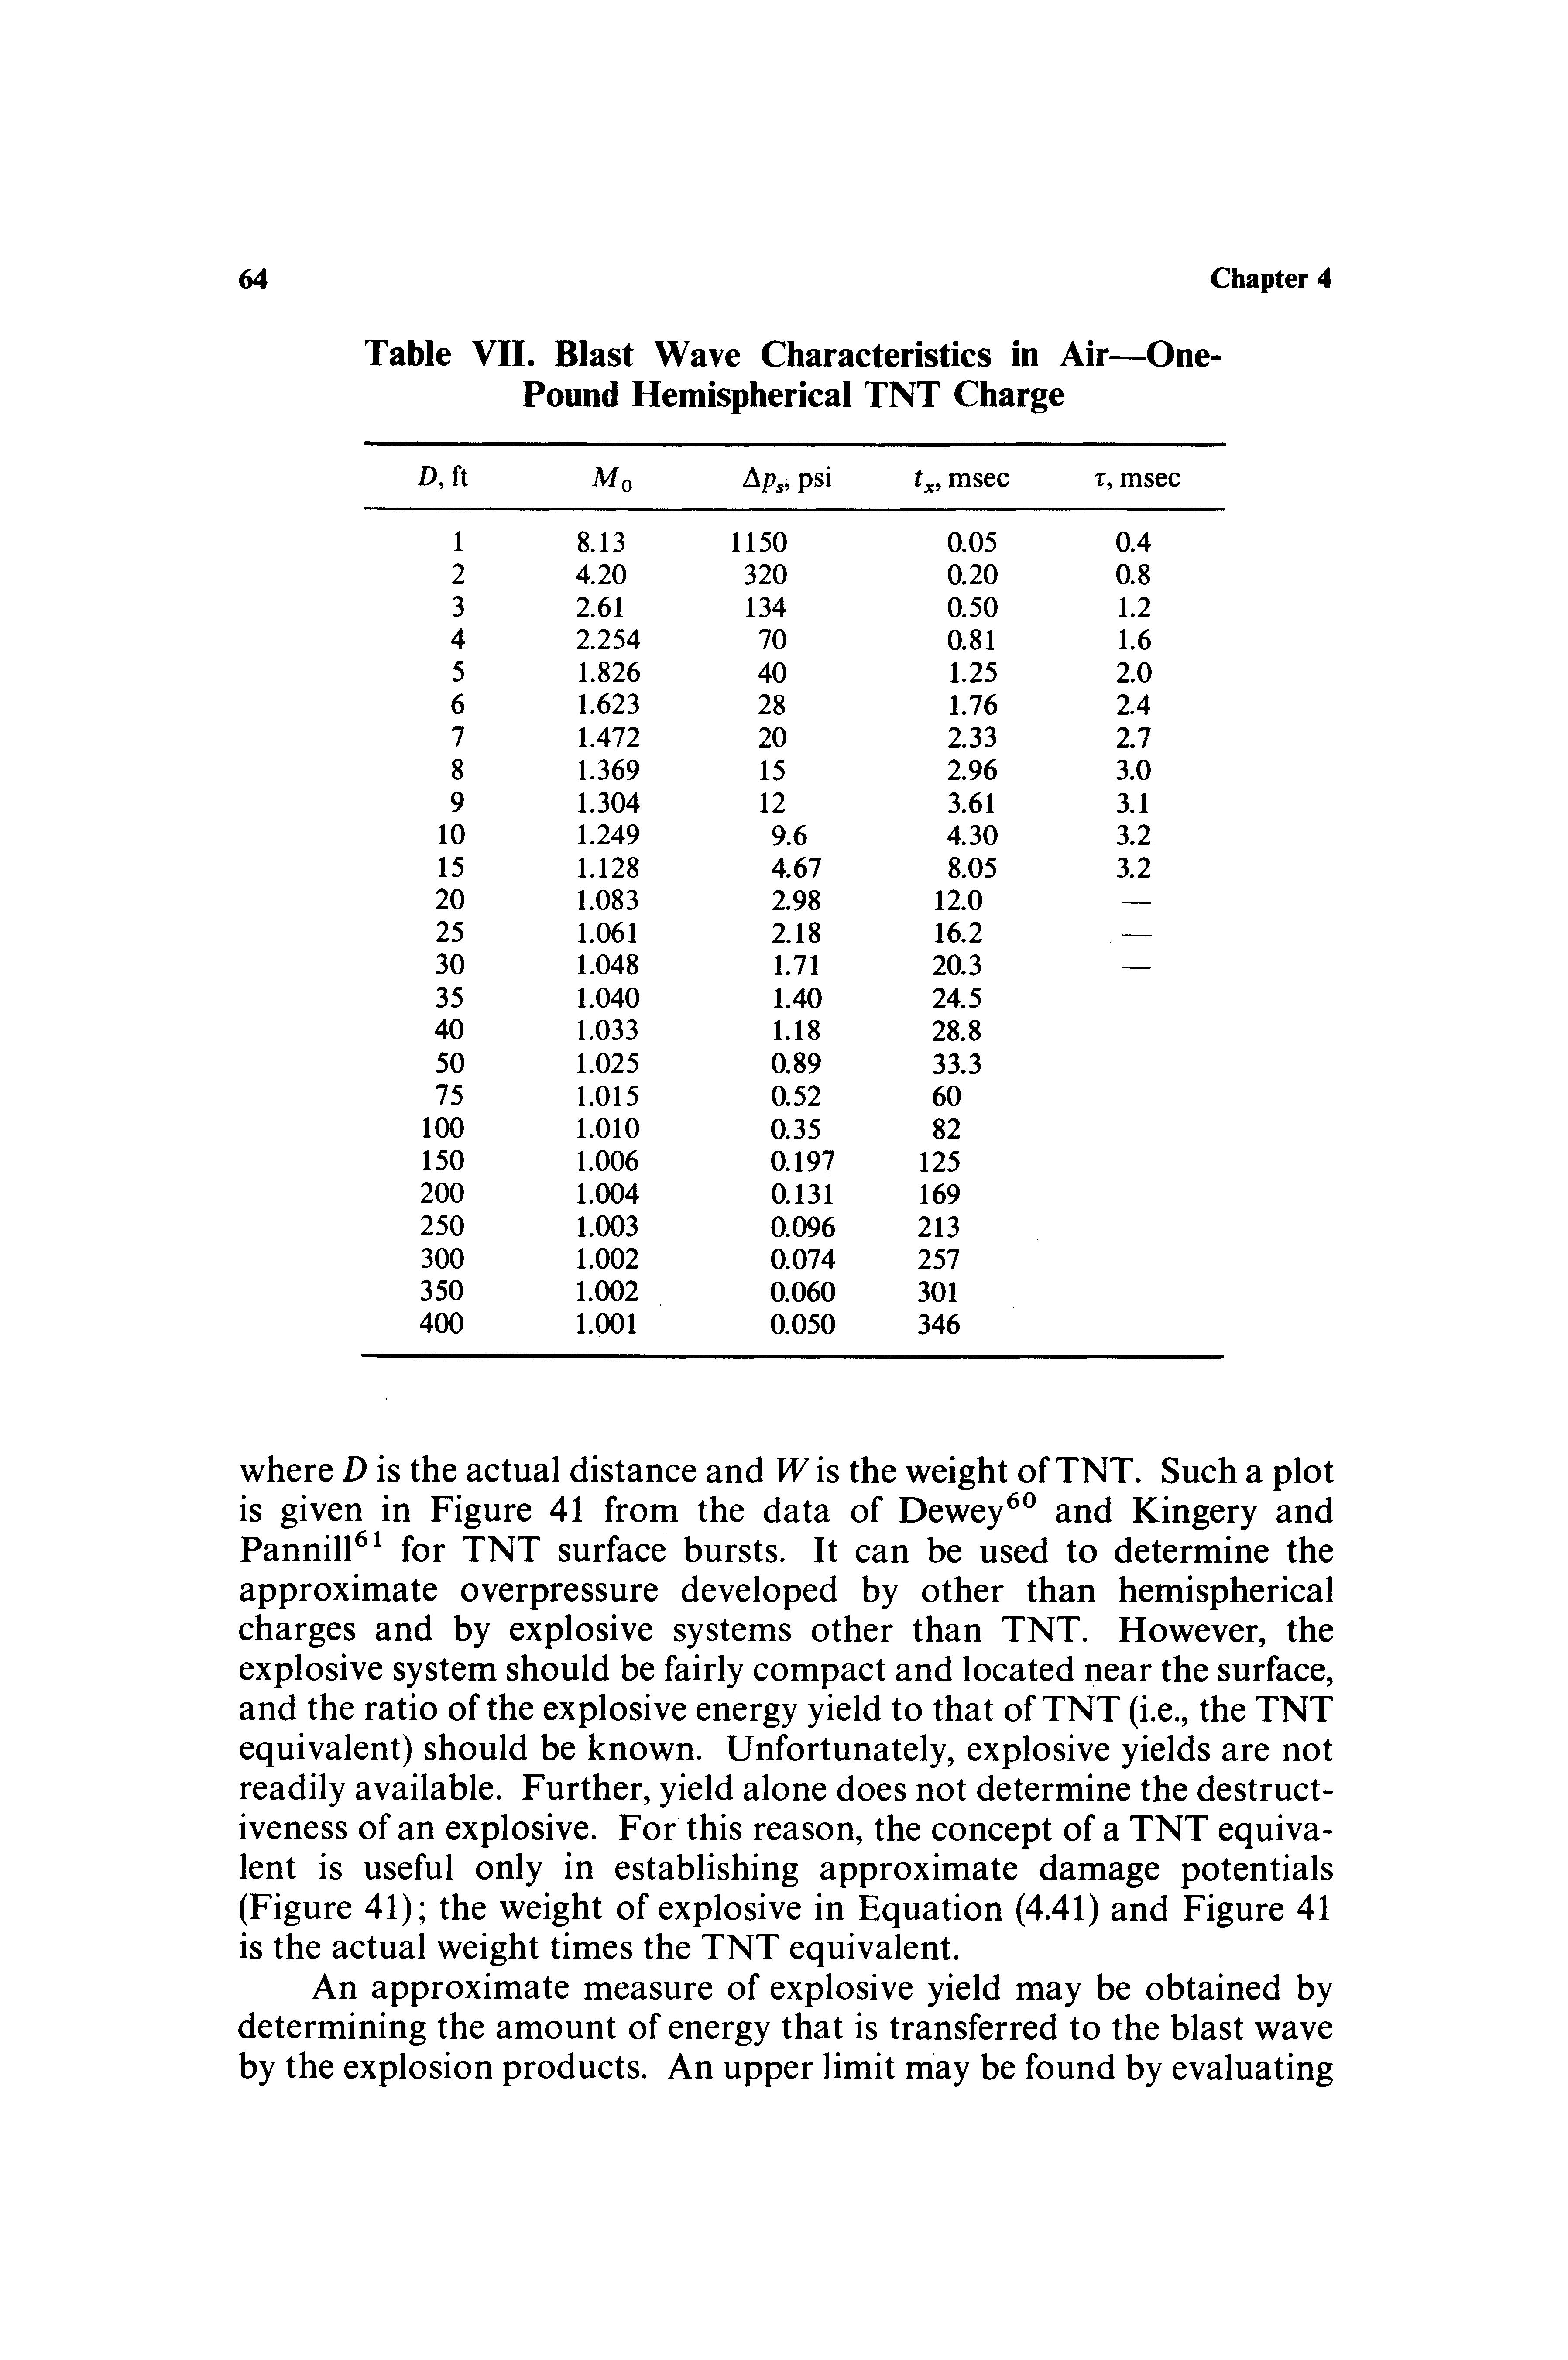 Table VII. Blast Wave Characteristics in Air—One-Pound Hemispherical TNT Charge...